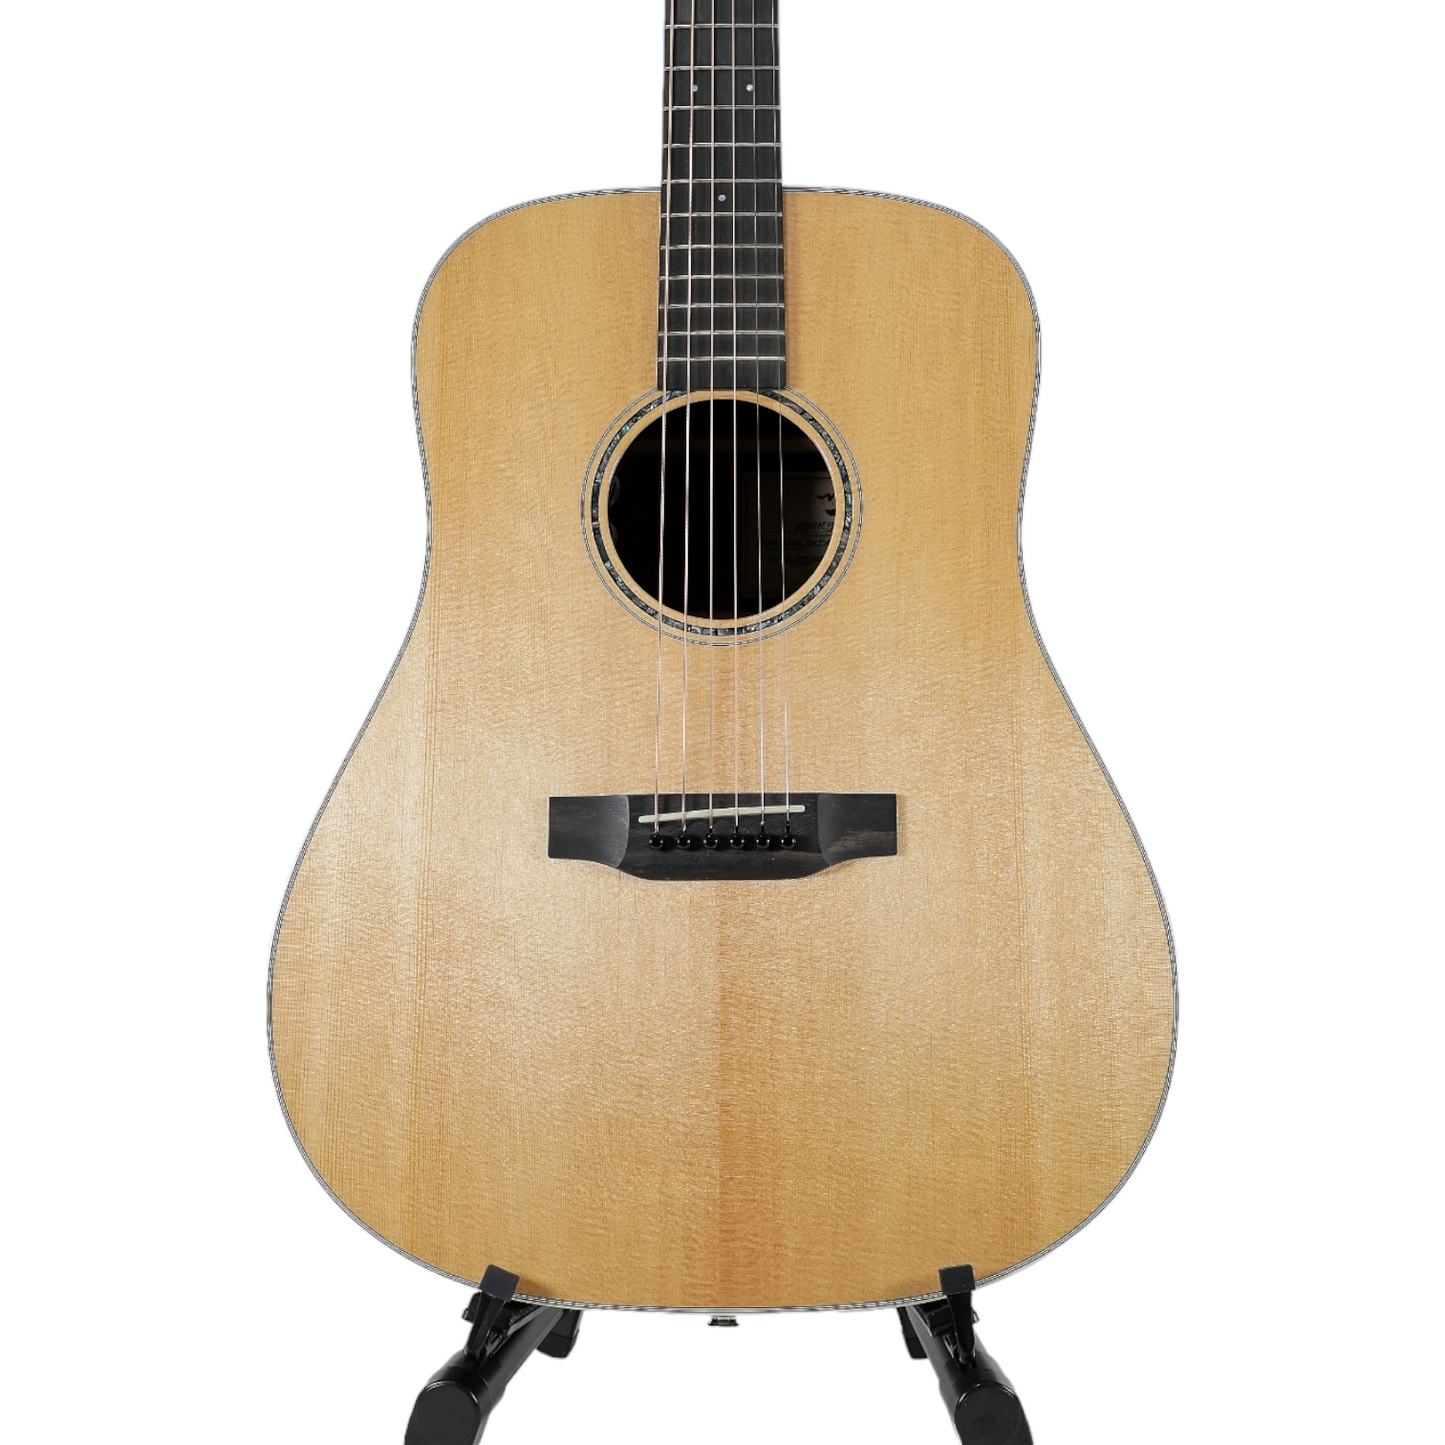 2011 Breedlove American Series D/SRe - Sitka Spruce Top - Acoustic Electric